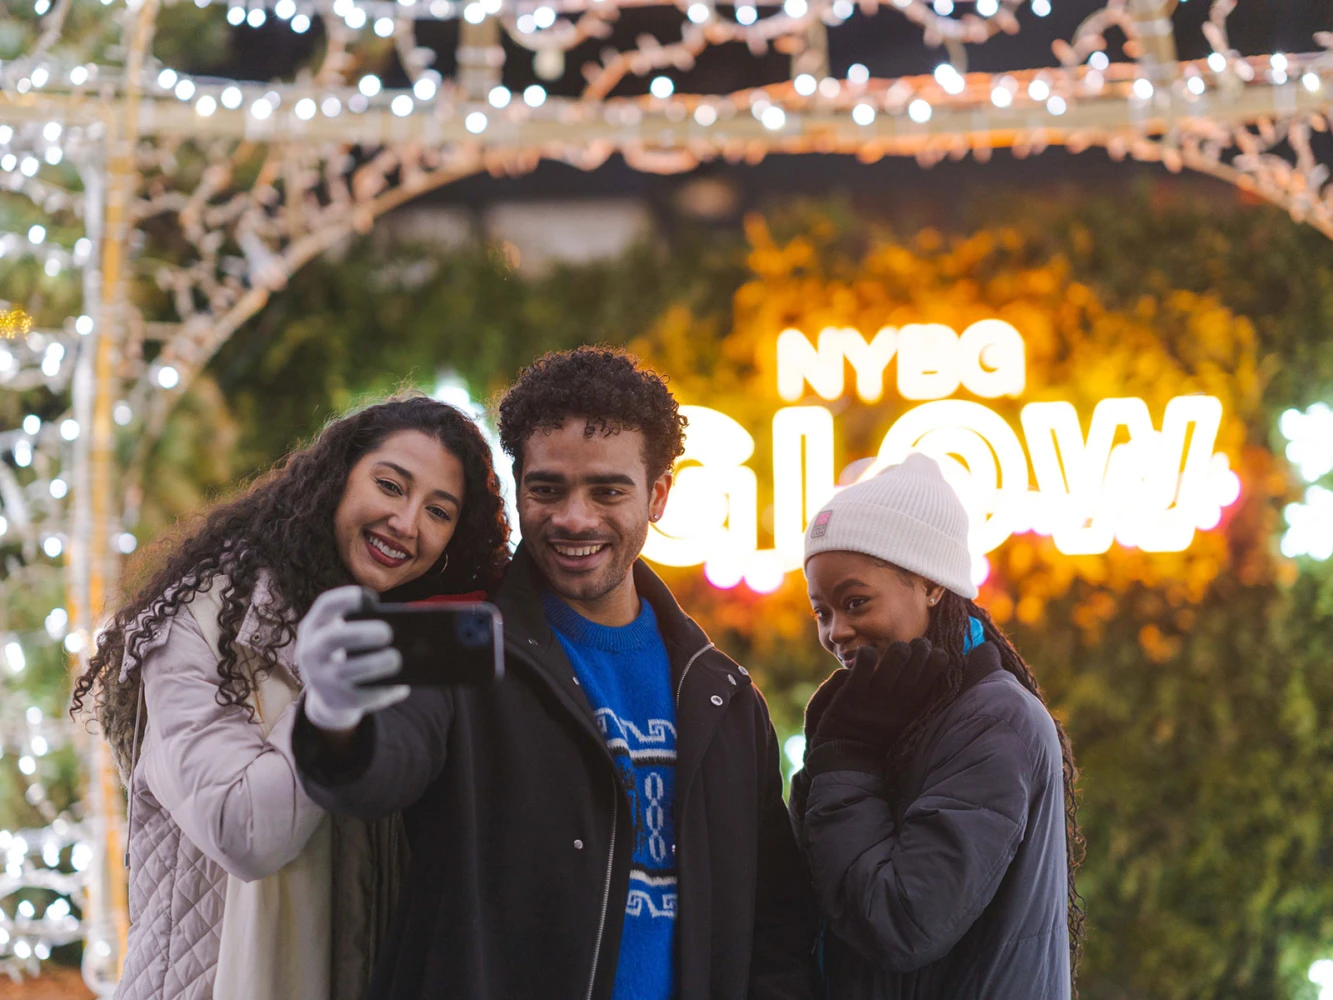 NYBG GLOW: An Outdoor Color & Light Experience: What to expect - 3